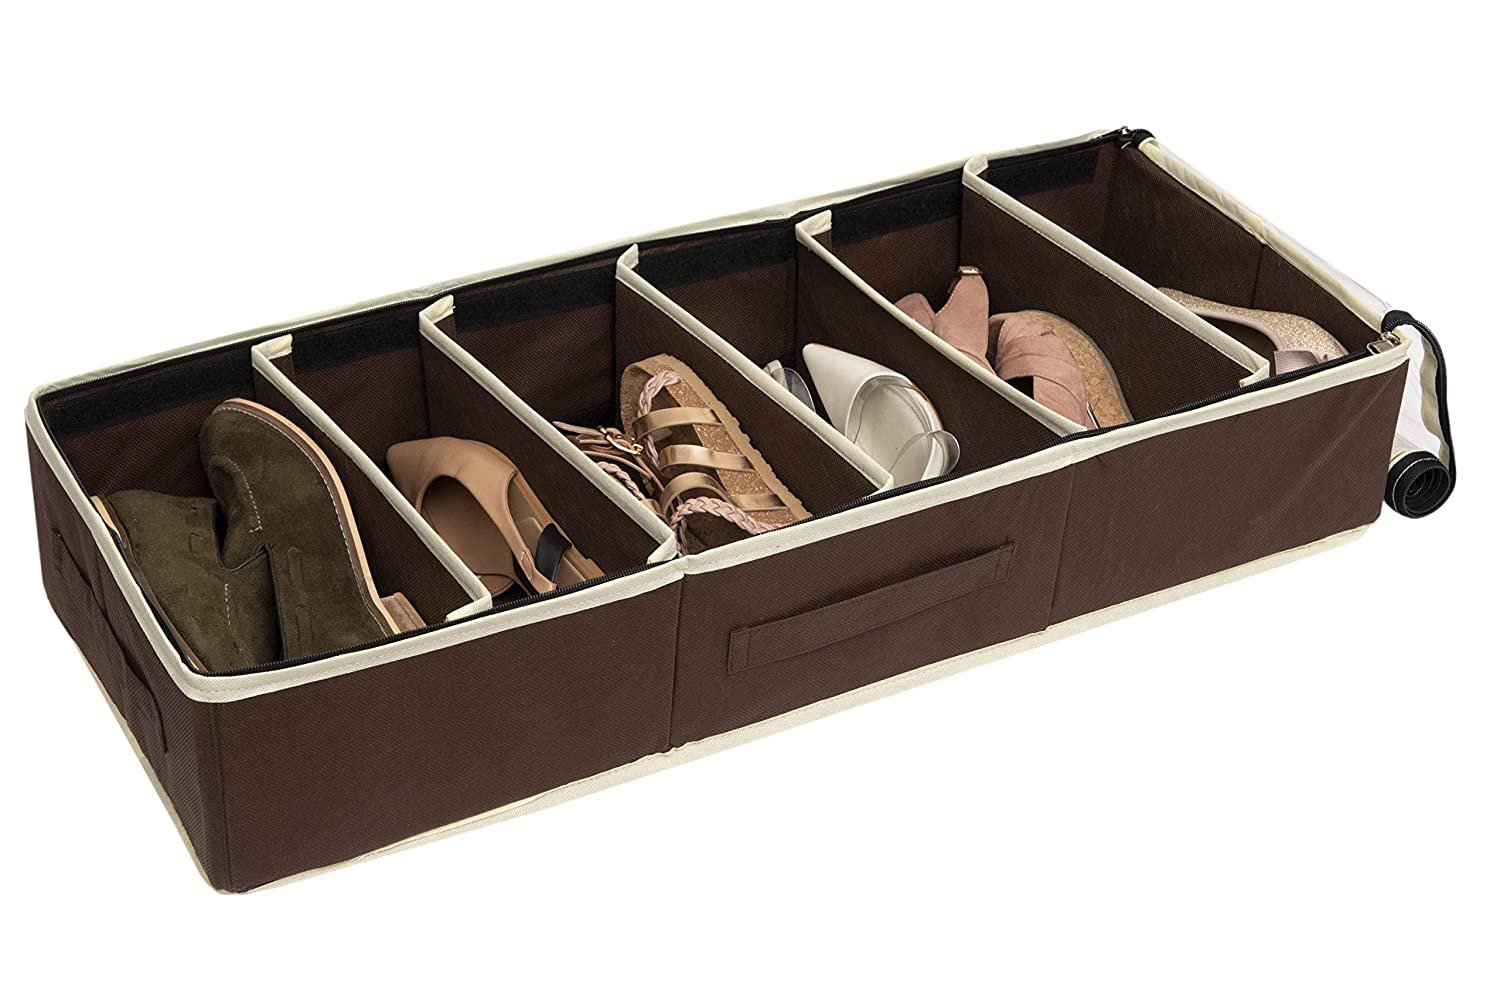 Under the bed shoe organizers